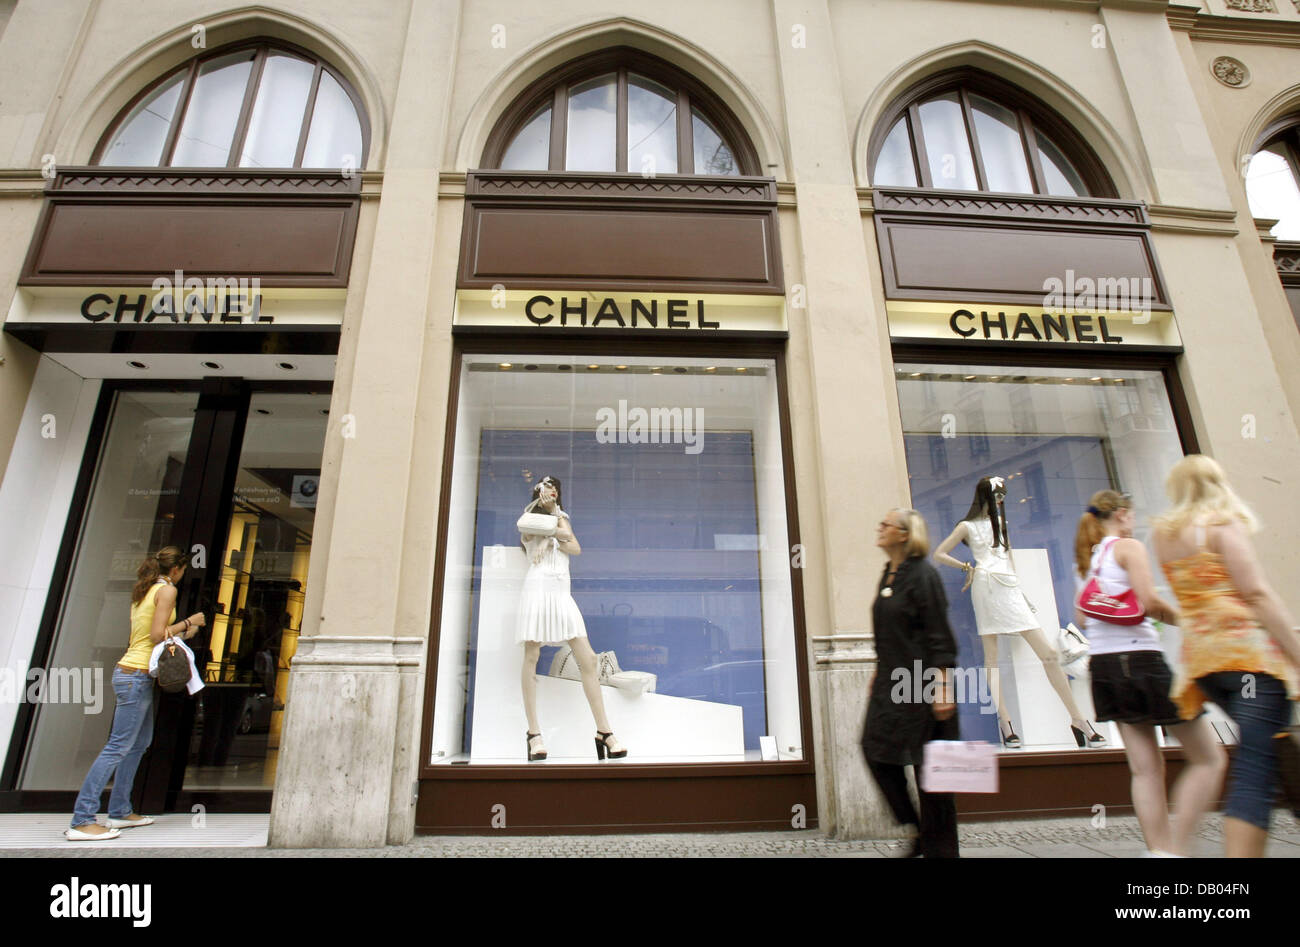 Pedestrians pass the 'Chanel' store at Maximilianstrasse in Munich